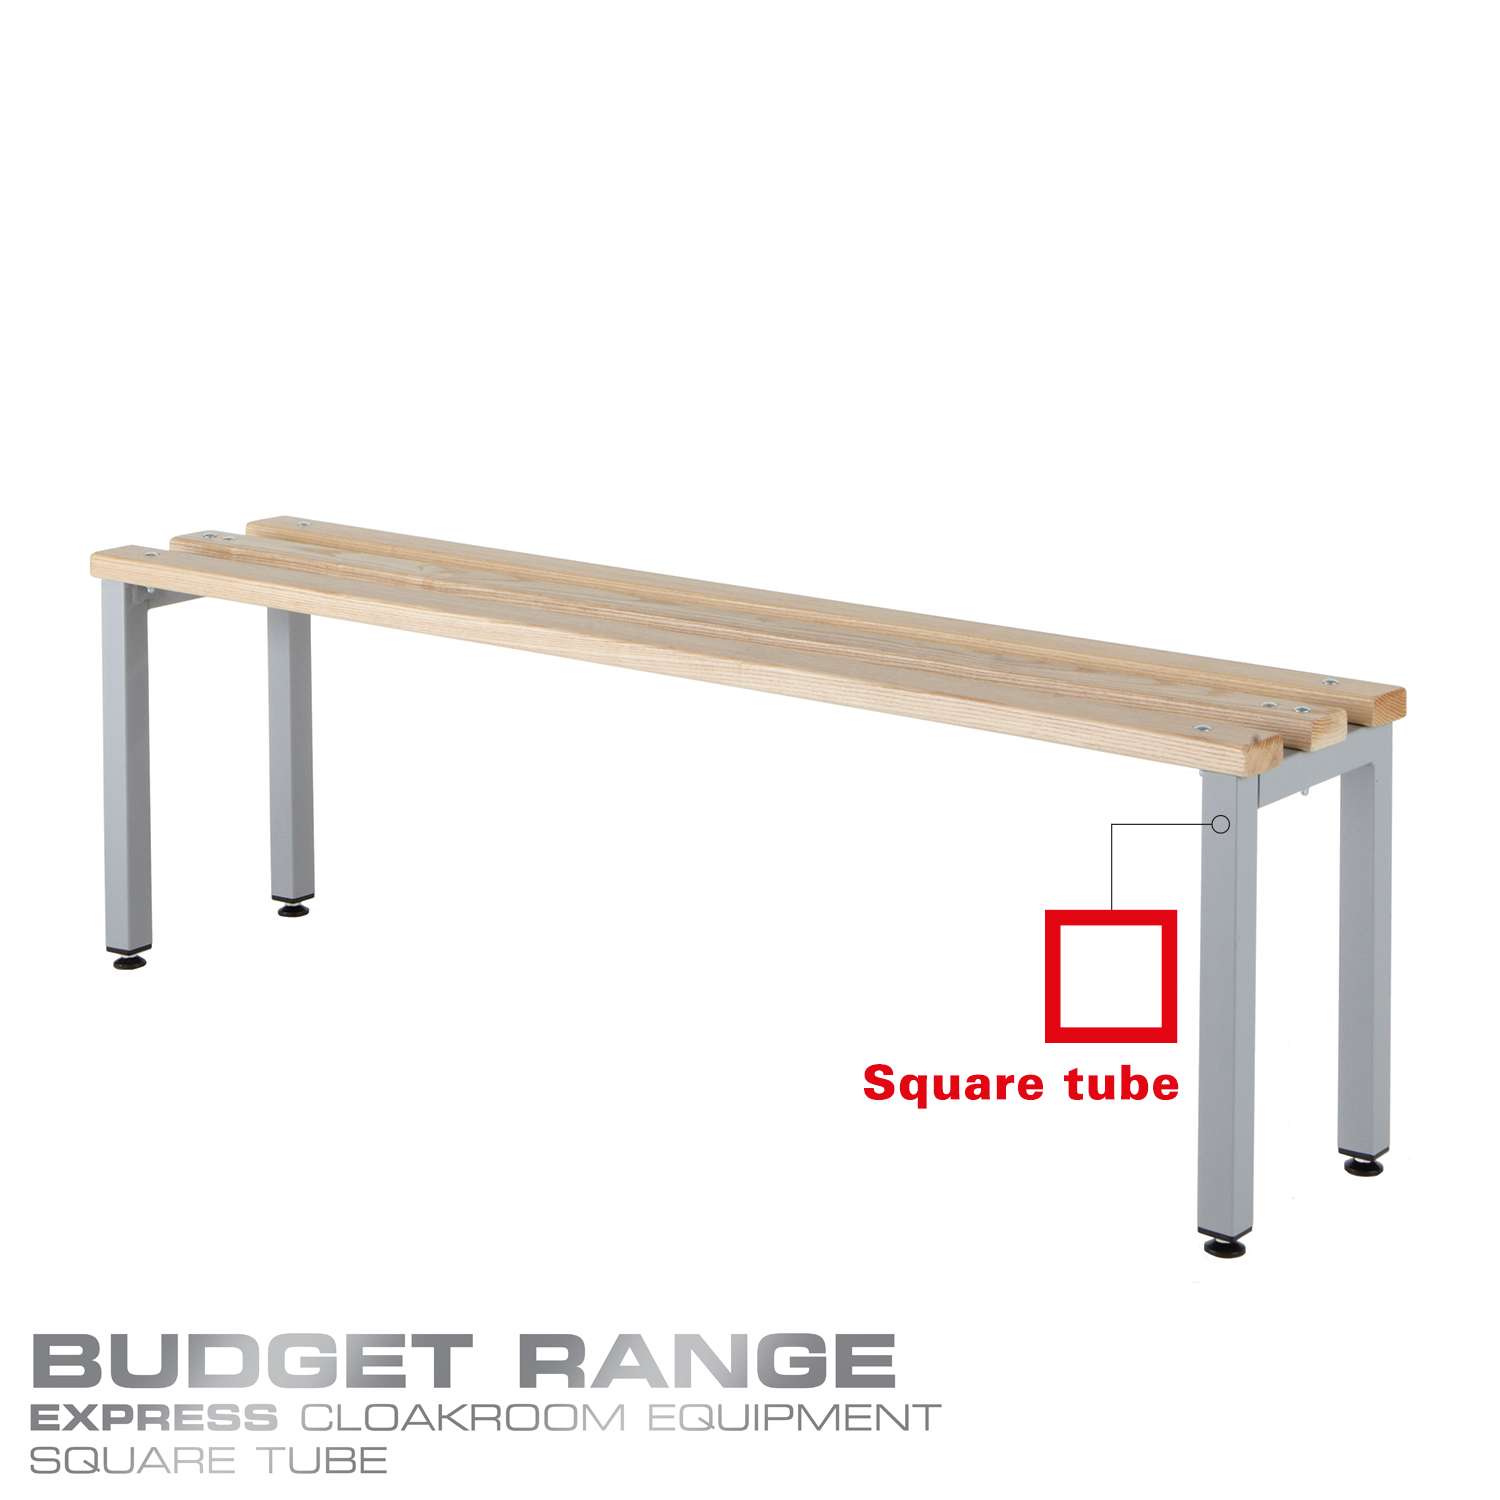 Probe cloakroom wood bench in your budget range